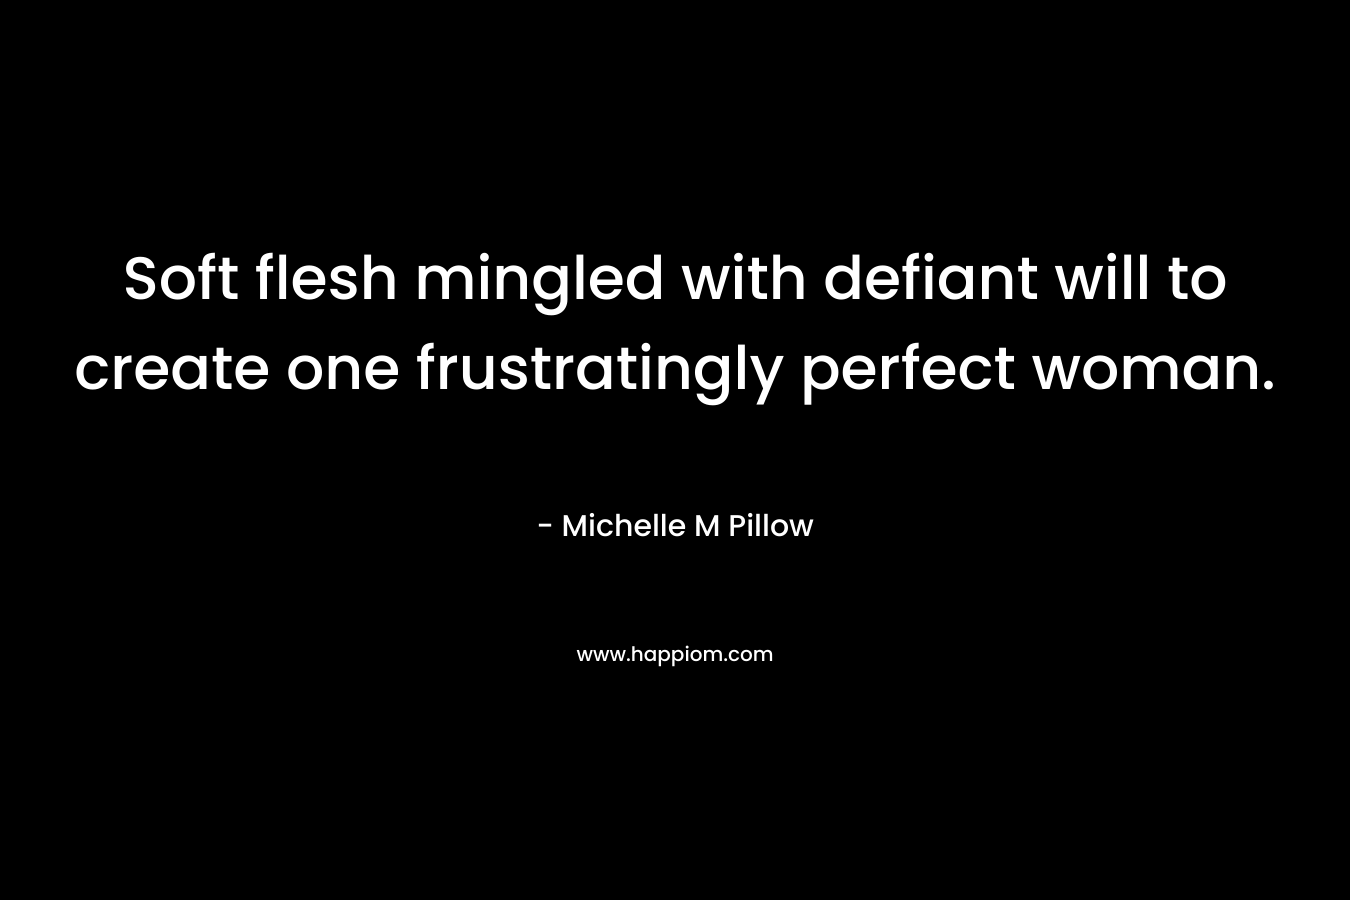 Soft flesh mingled with defiant will to create one frustratingly perfect woman. – Michelle M Pillow